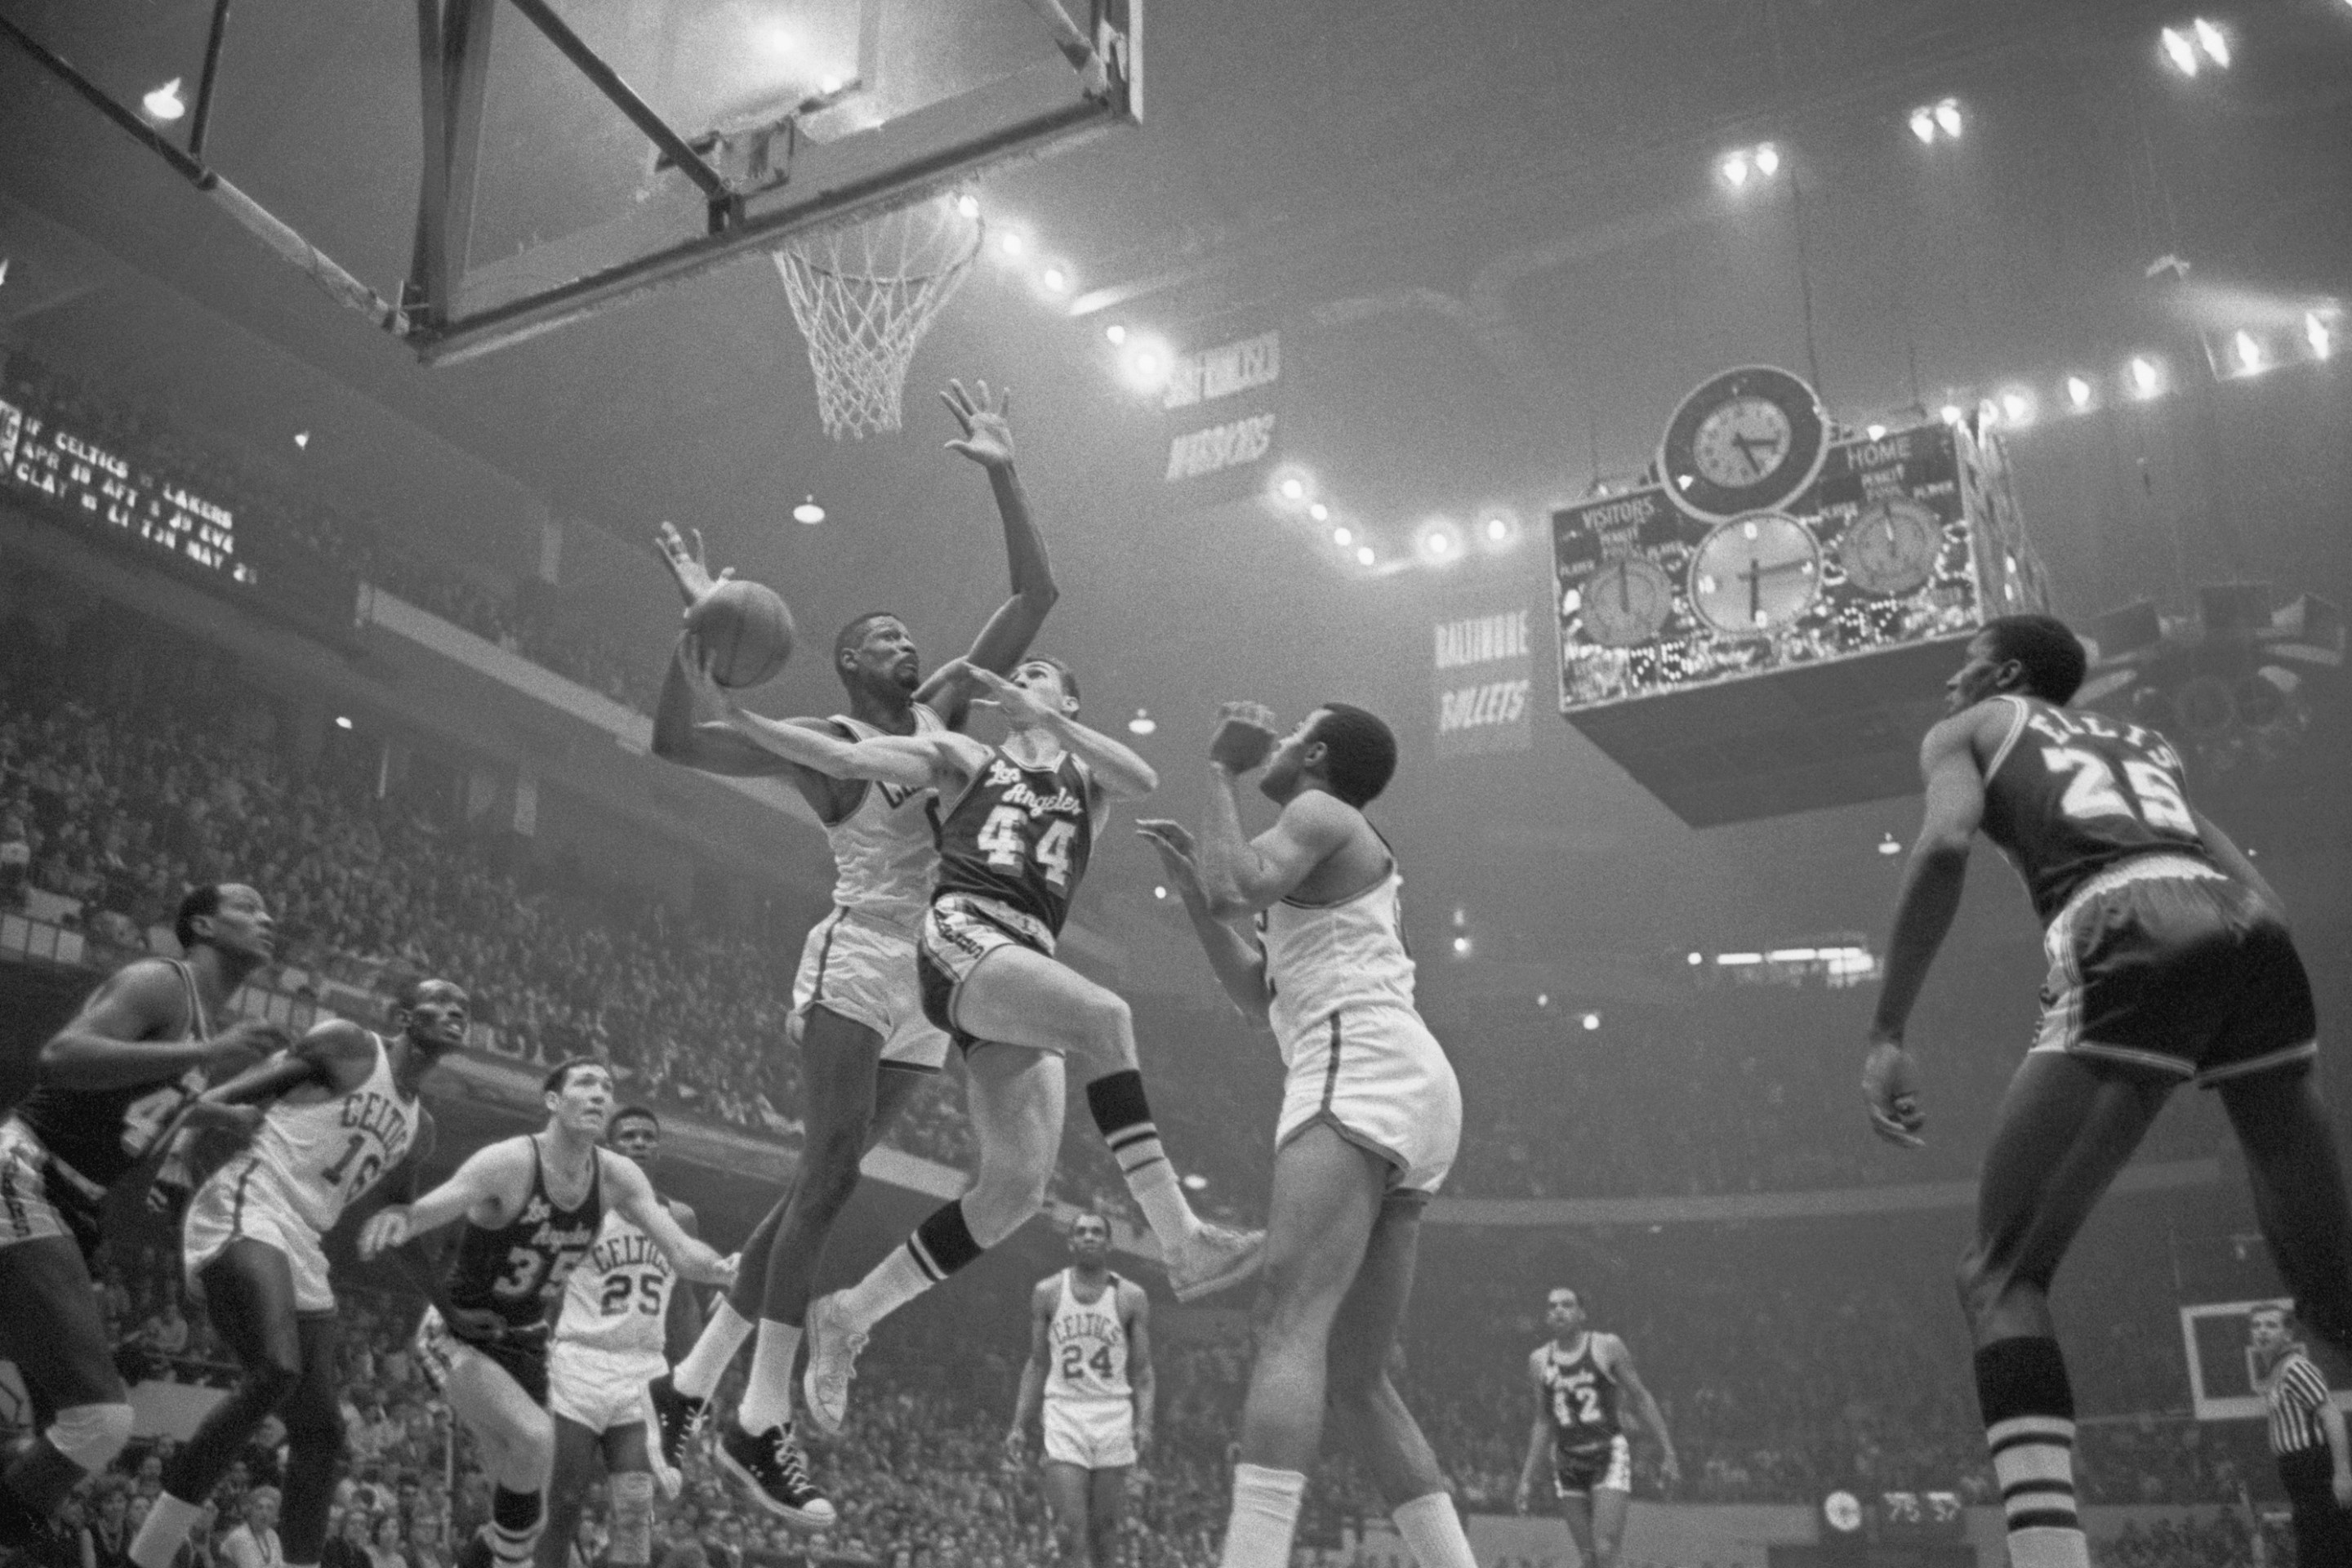 (Original Caption) Lakers' Jerry West (C) is guarded closely by Celtics' Bill Russell (L) as he goes in for a layup, 3rd period, 1st game of championship playoffs of the NBA, Boston Garden (4/18). Celtics' Willie Naulls is on the right. Celtics won the game, 142-110.